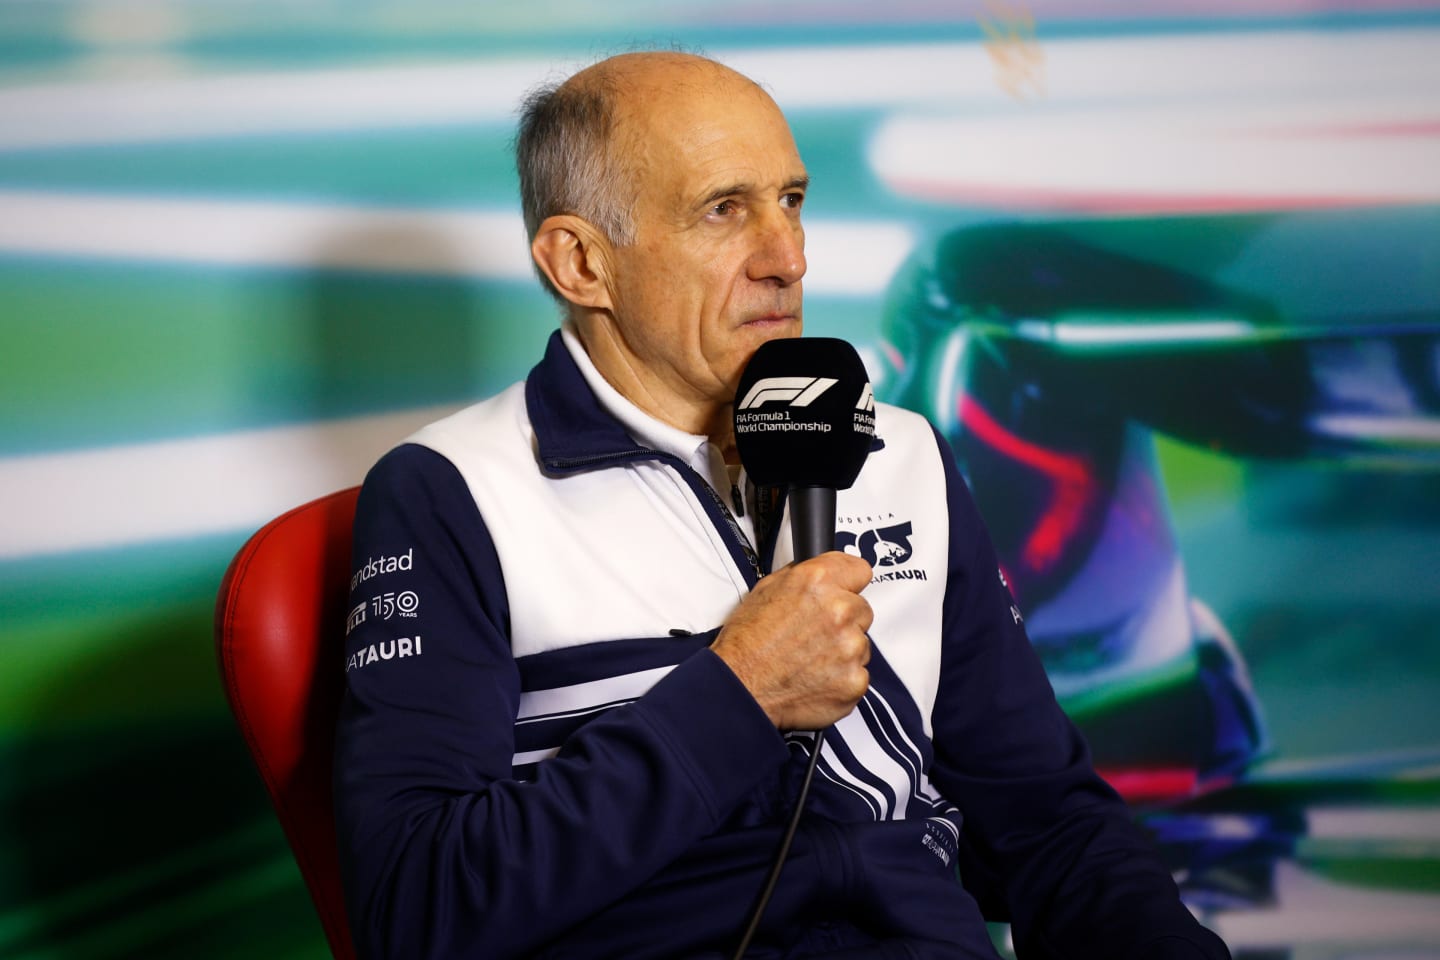 MEXICO CITY, MEXICO - OCTOBER 29: Scuderia AlphaTauri Team Principal Franz Tost attends the Team Principals Press Conference prior to final practice ahead of the F1 Grand Prix of Mexico at Autodromo Hermanos Rodriguez on October 29, 2022 in Mexico City, Mexico. (Photo by Chris Graythen/Getty Images)